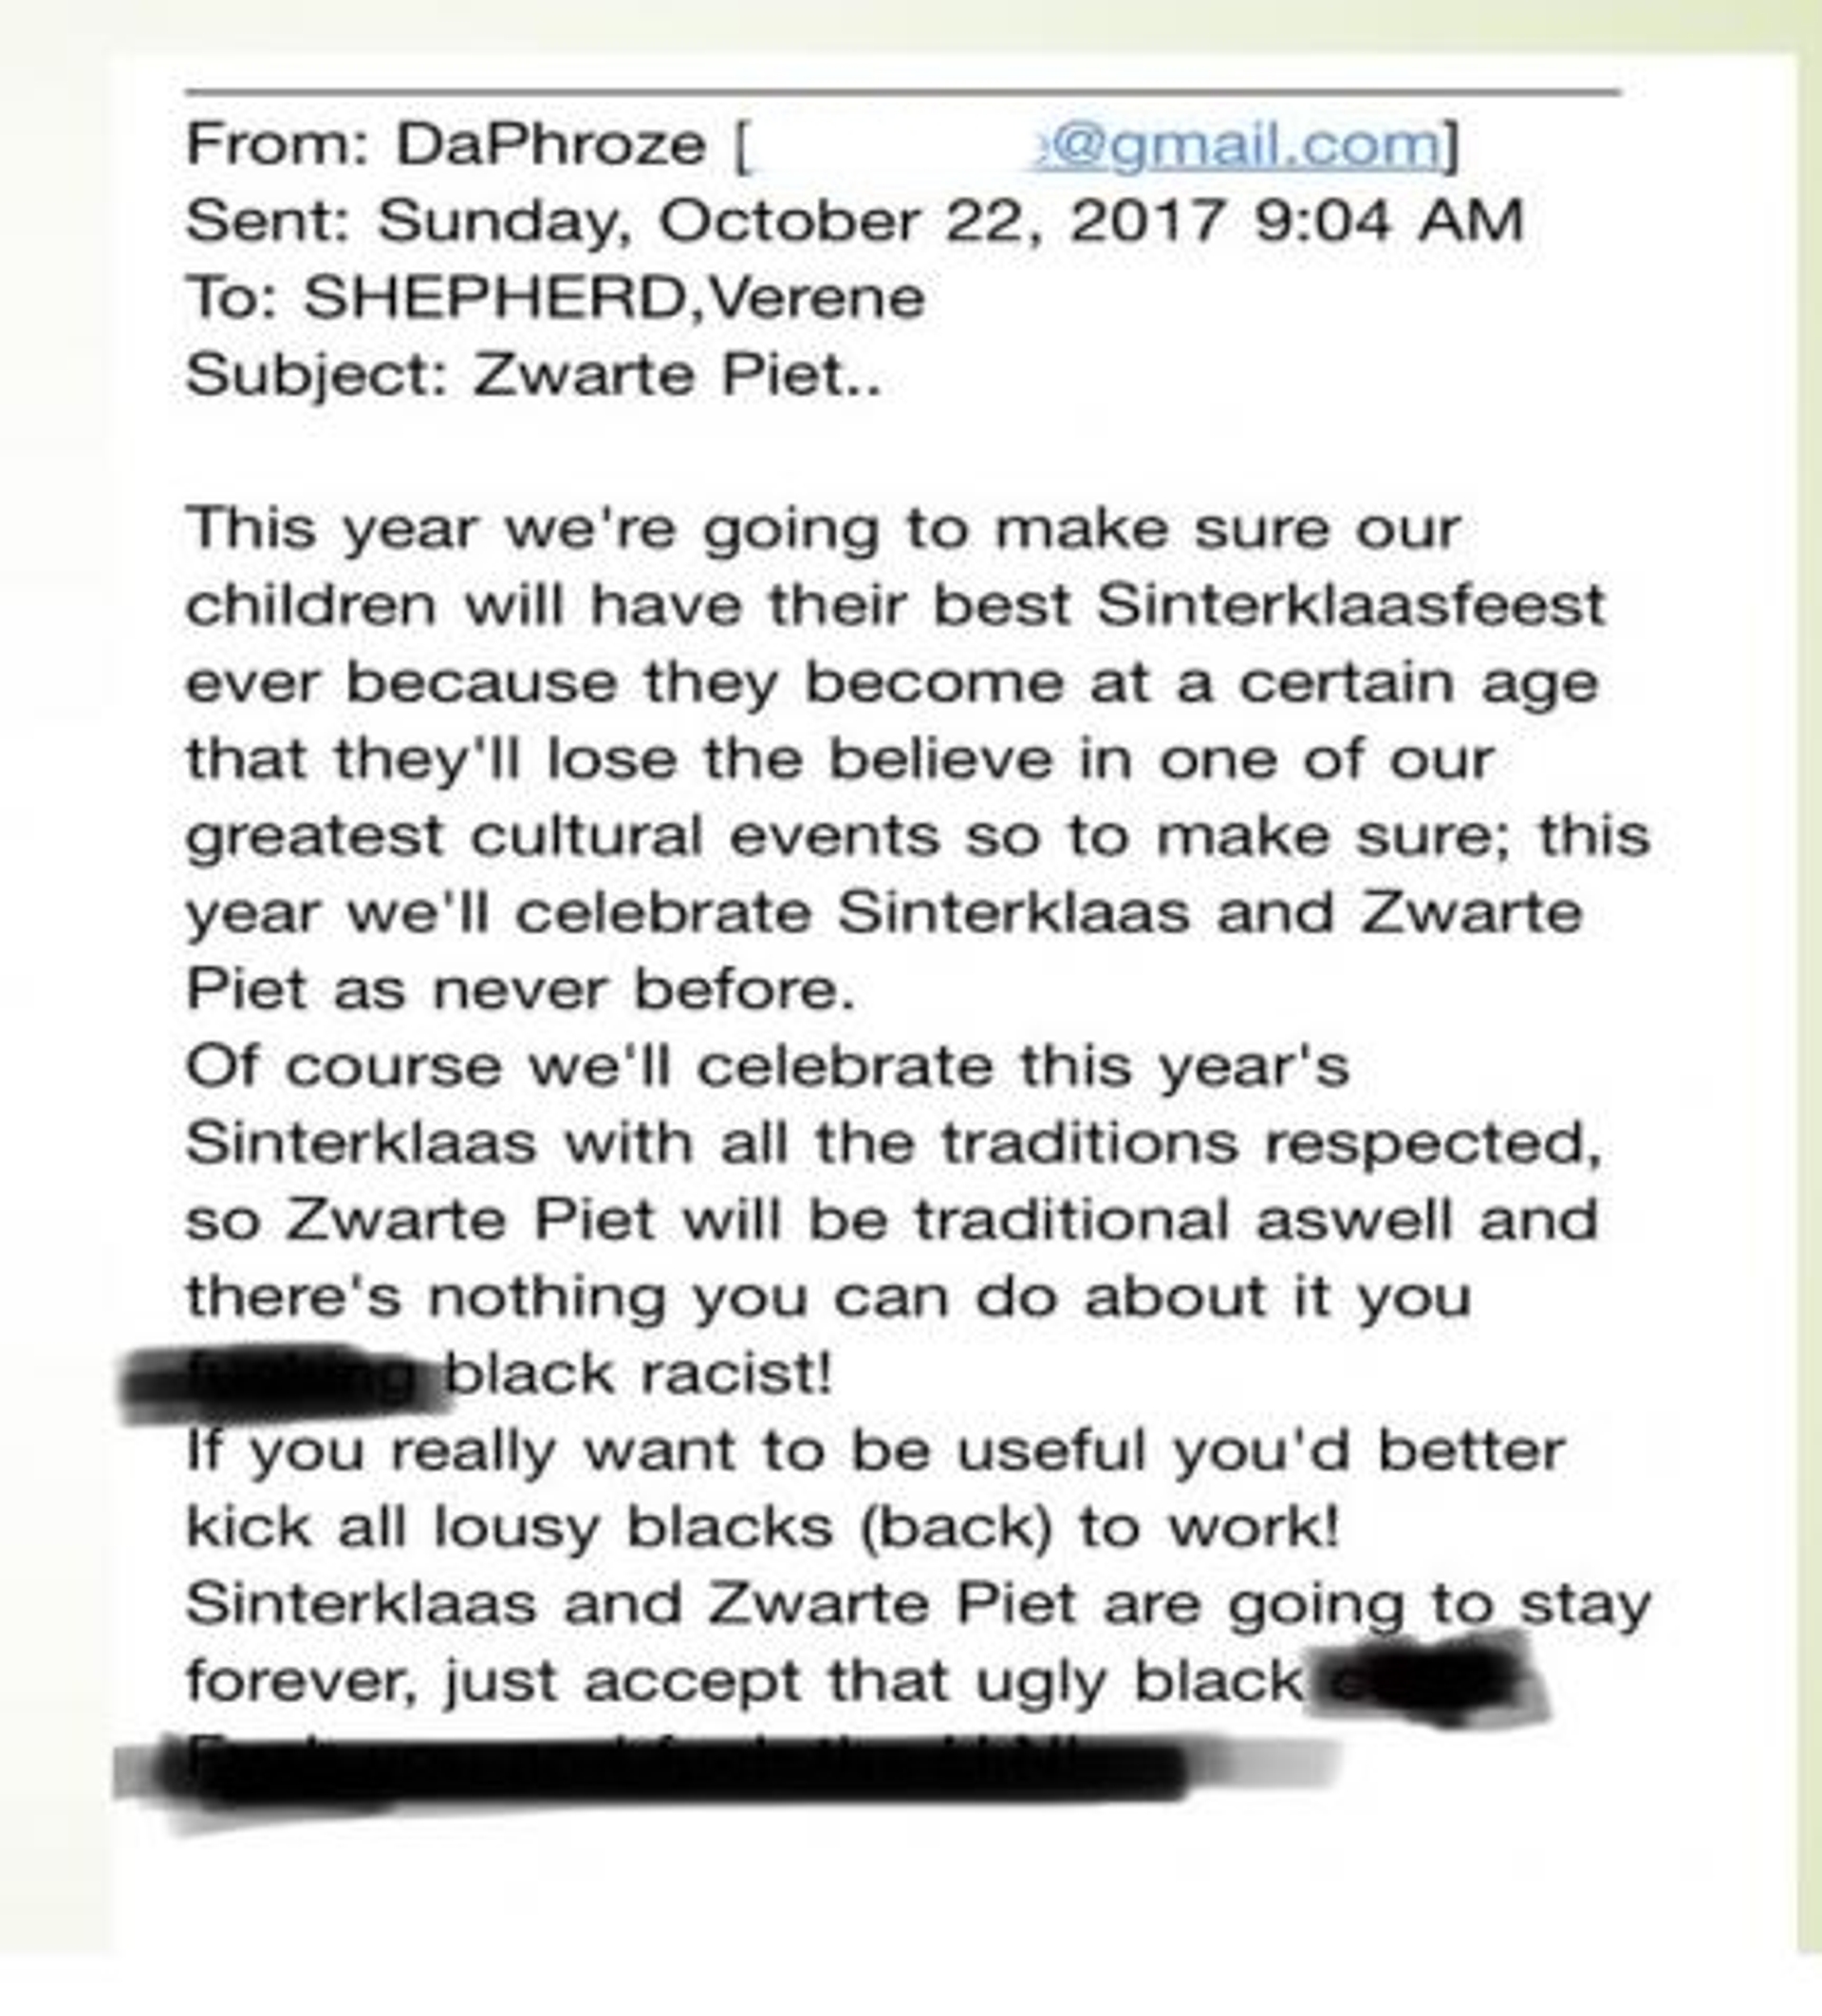 vile_cyber_racism_addressed_to_shepherd_after_she_spoke_out_against_zwarte_piet